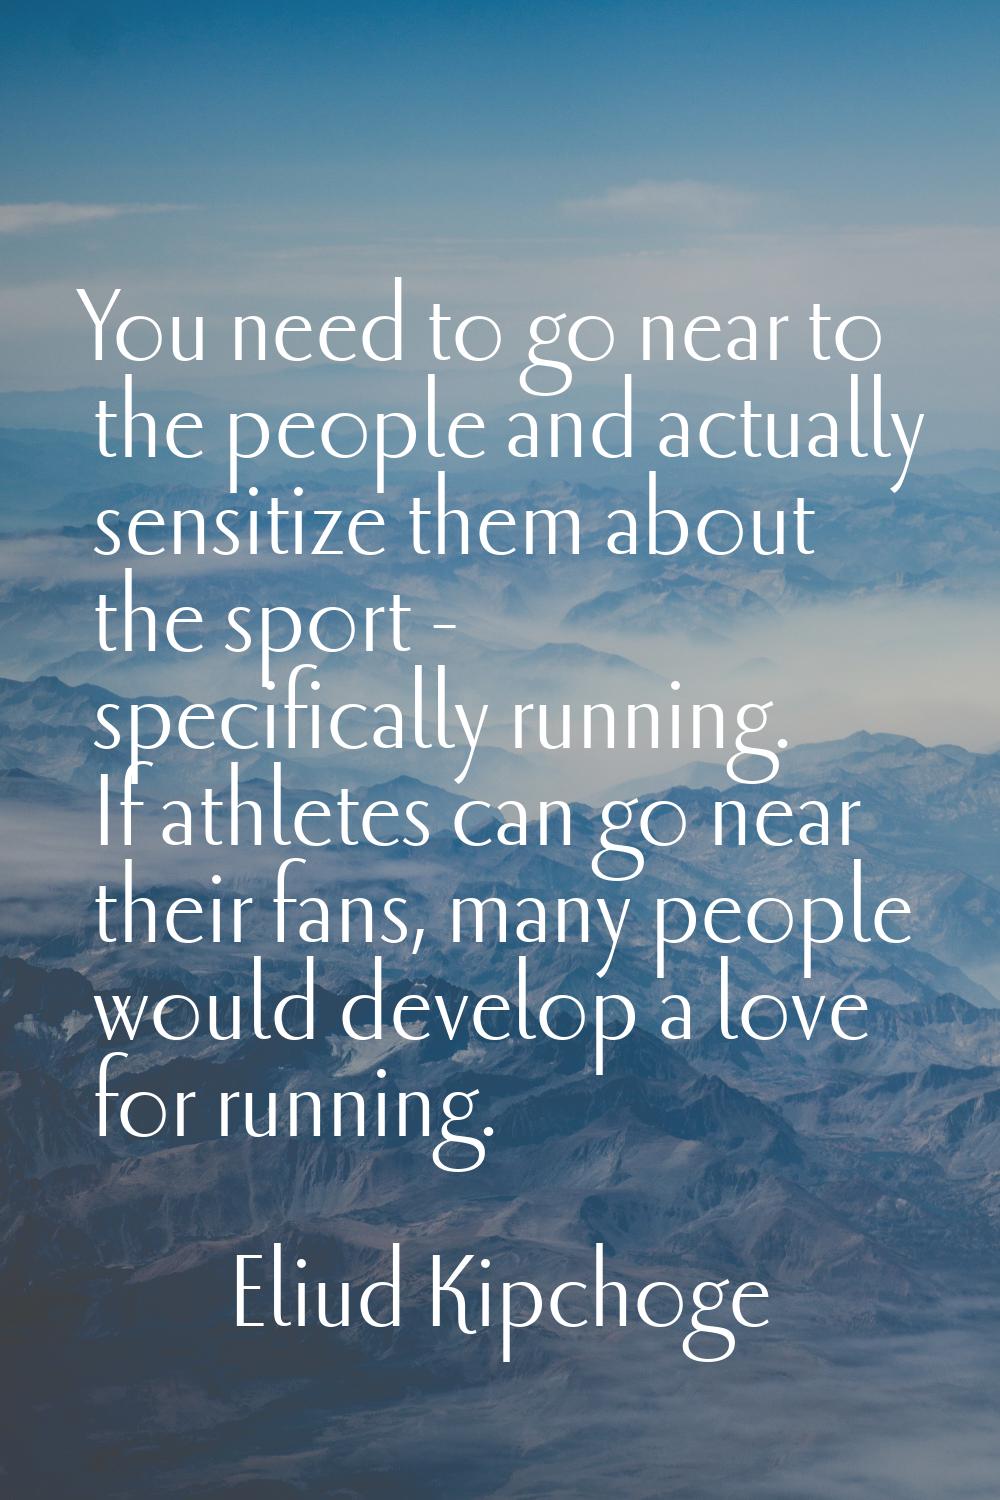 You need to go near to the people and actually sensitize them about the sport - specifically runnin